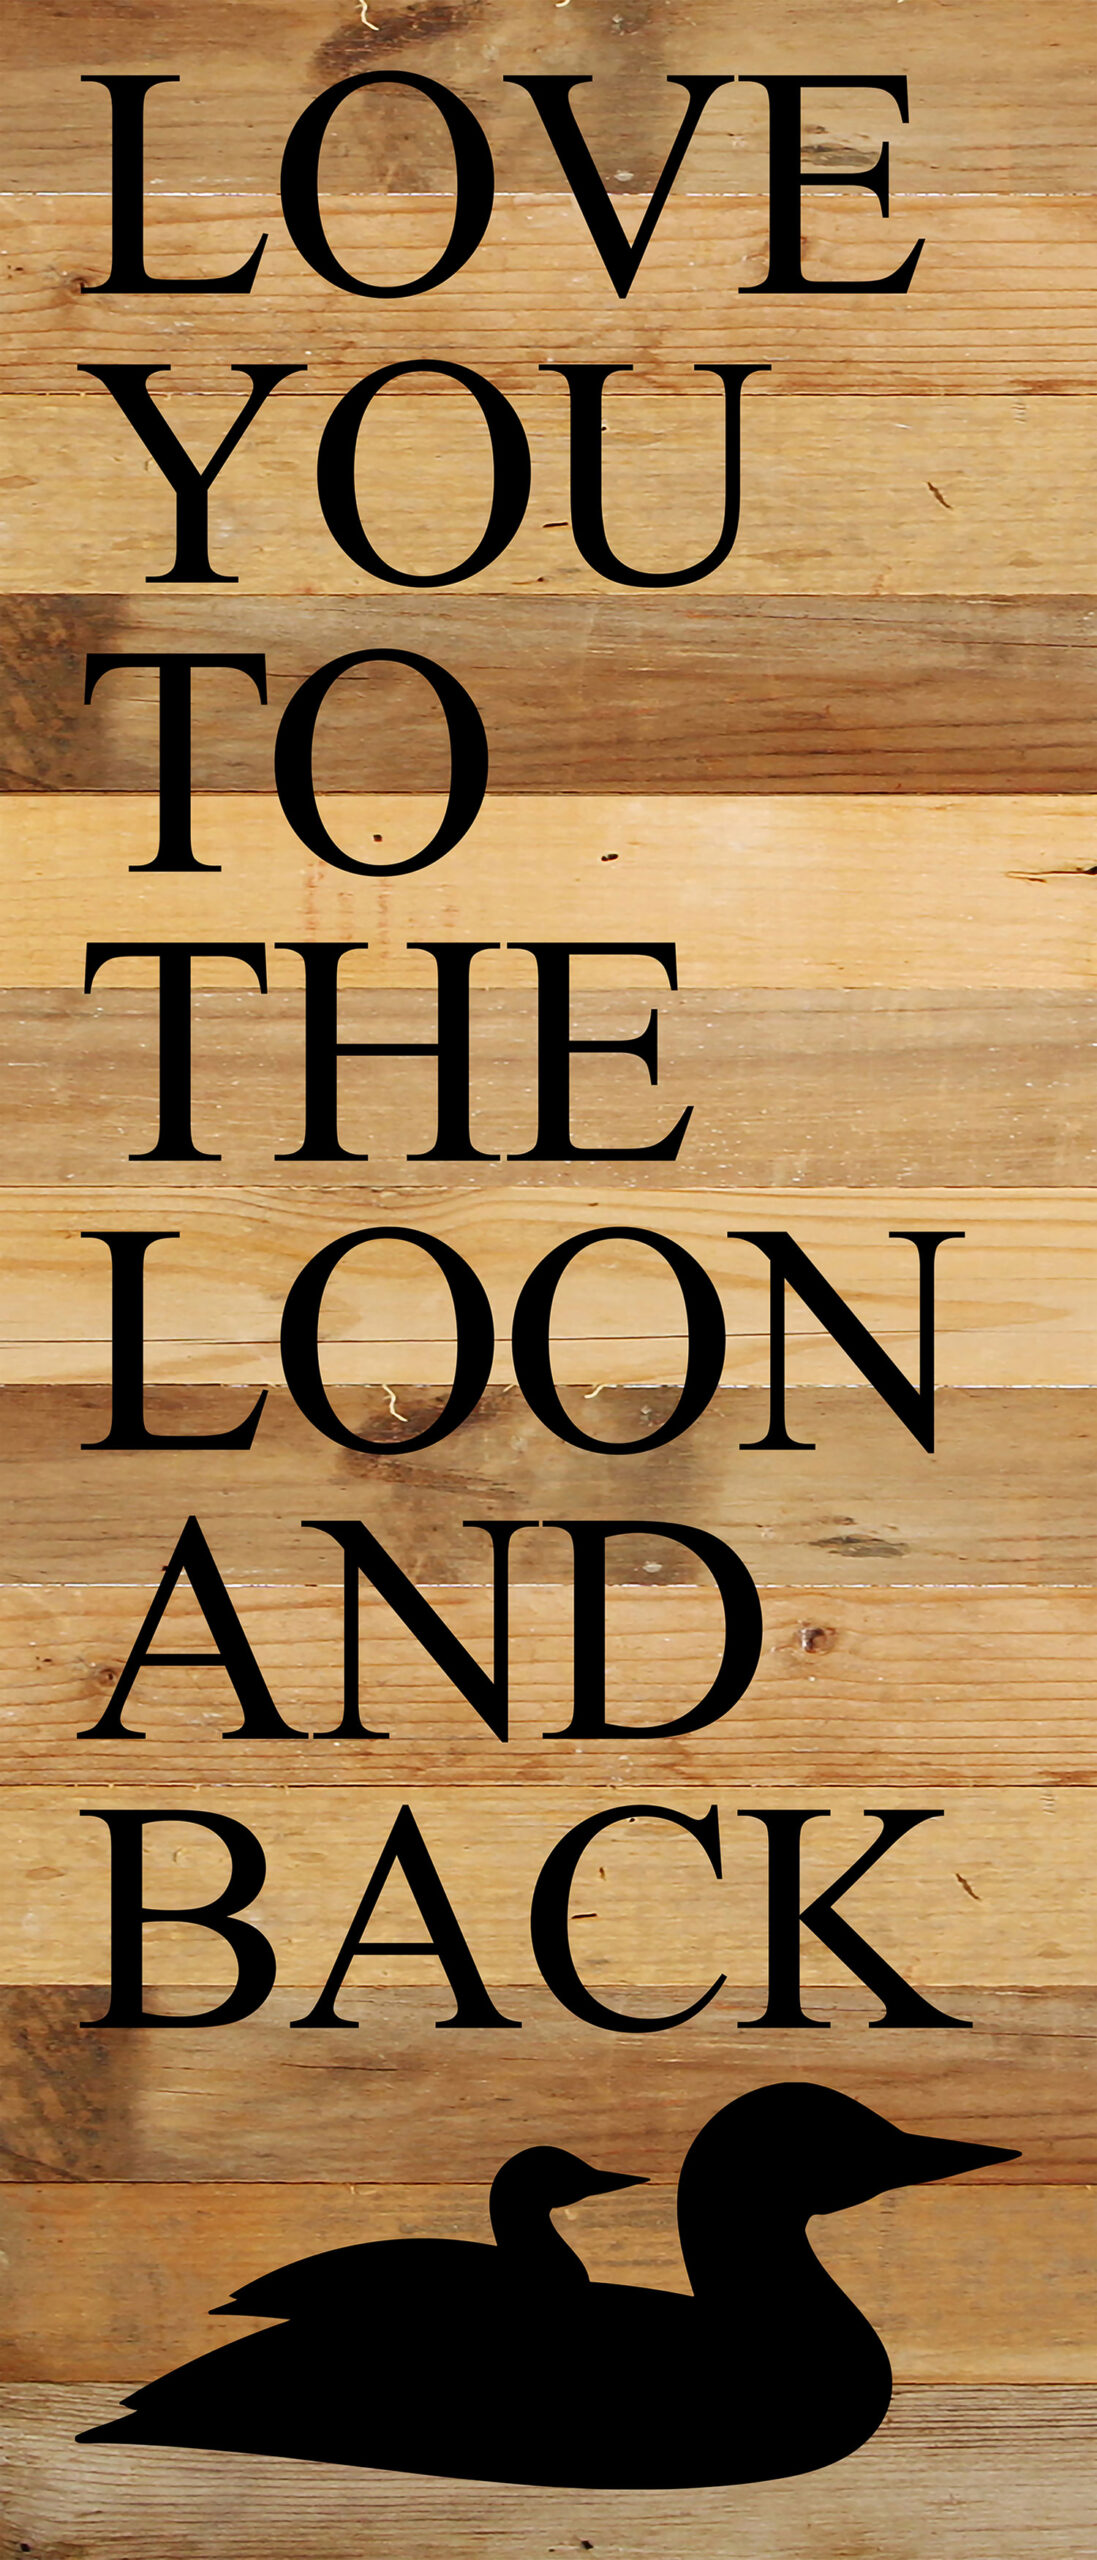 Love you to loon and back. / 6"x14" Reclaimed Wood Sign